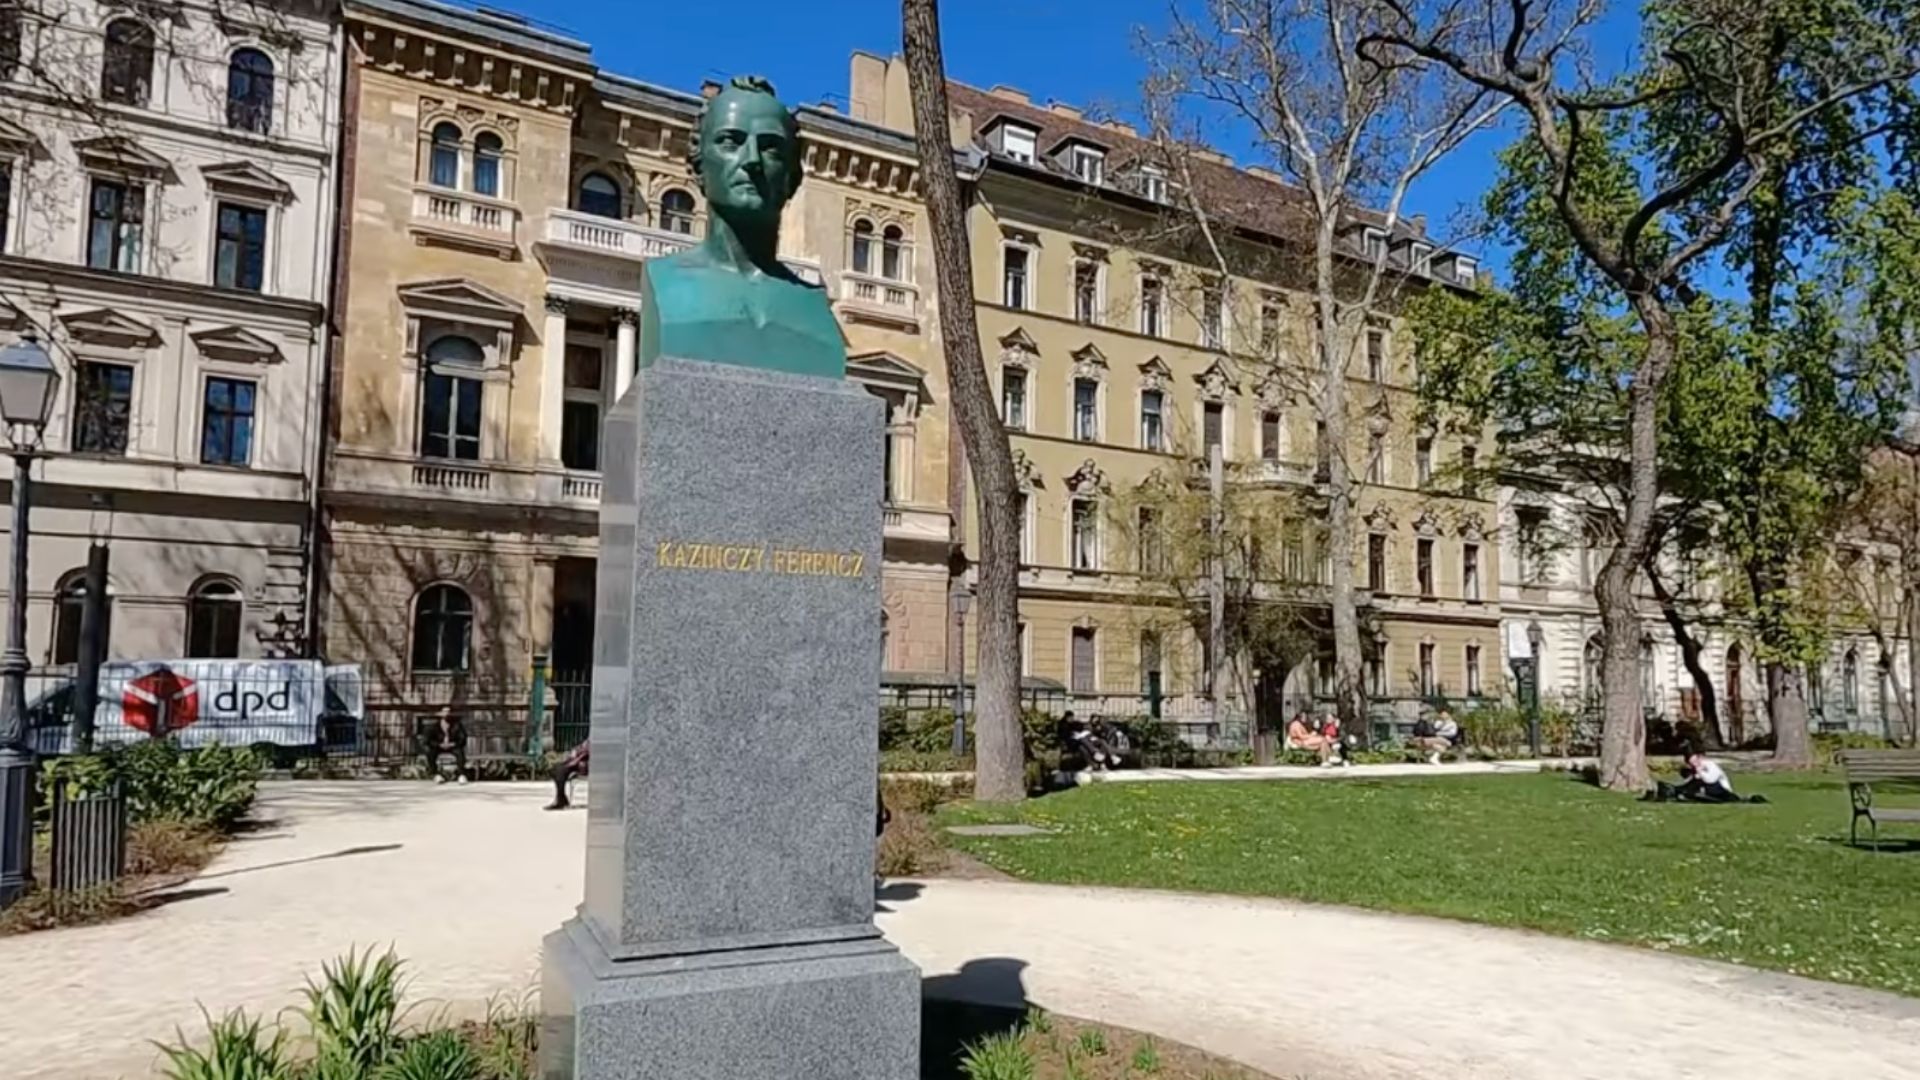 A bust in the Hungarian National Musuem garden